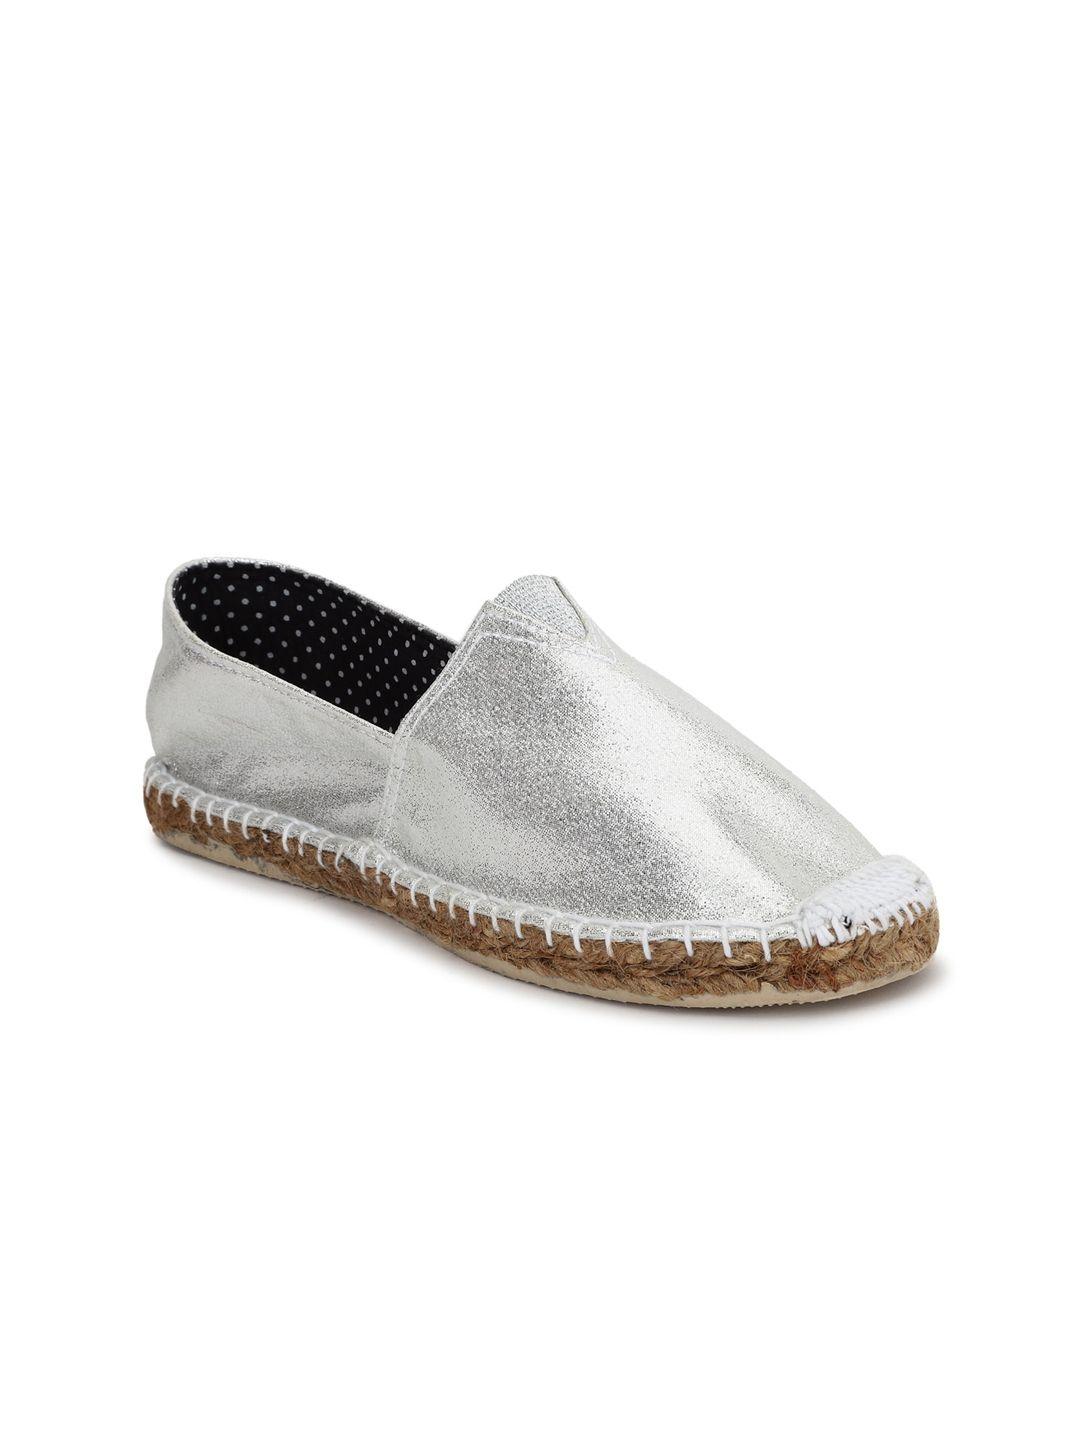 forever 21 women silver-toned pu espadrilles